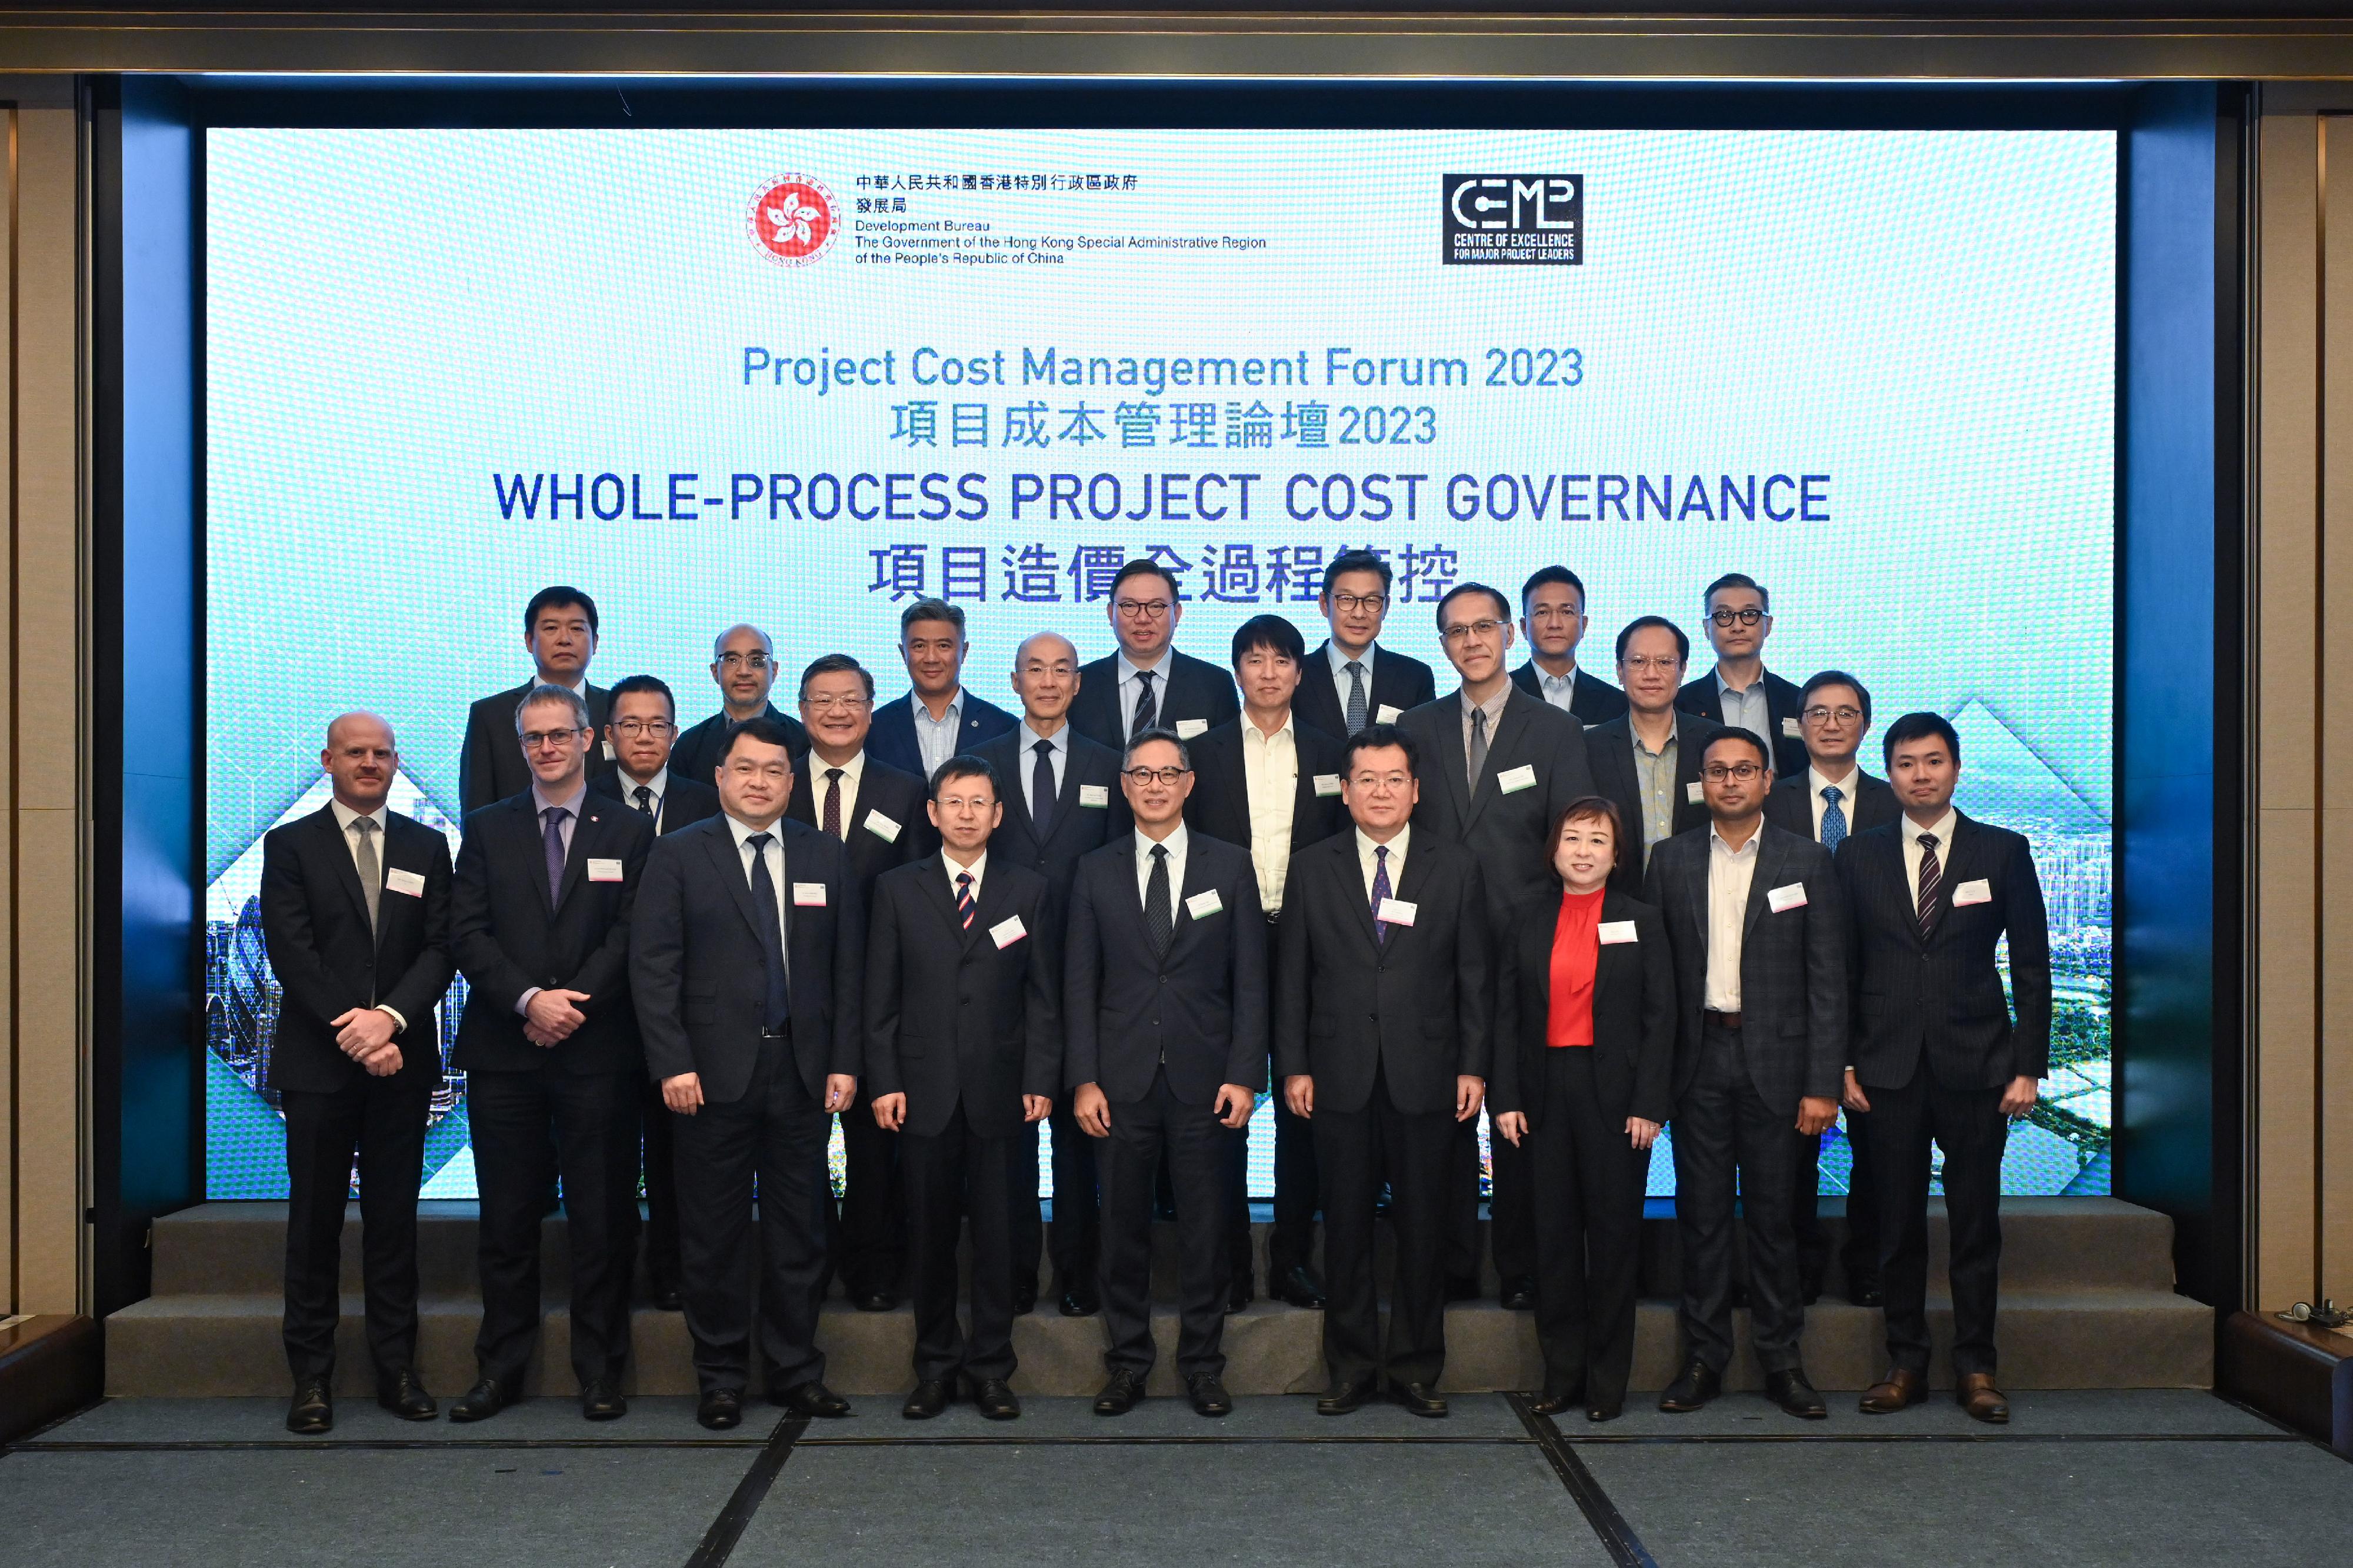 The Development Bureau today (November 1) organised the Project Cost Management Forum 2023 to promote the importance of cost management towards a sustainable development of the construction industry. Photo shows the Permanent Secretary for Development (Works), Mr Ricky Lau (front row, centre), with other guests.